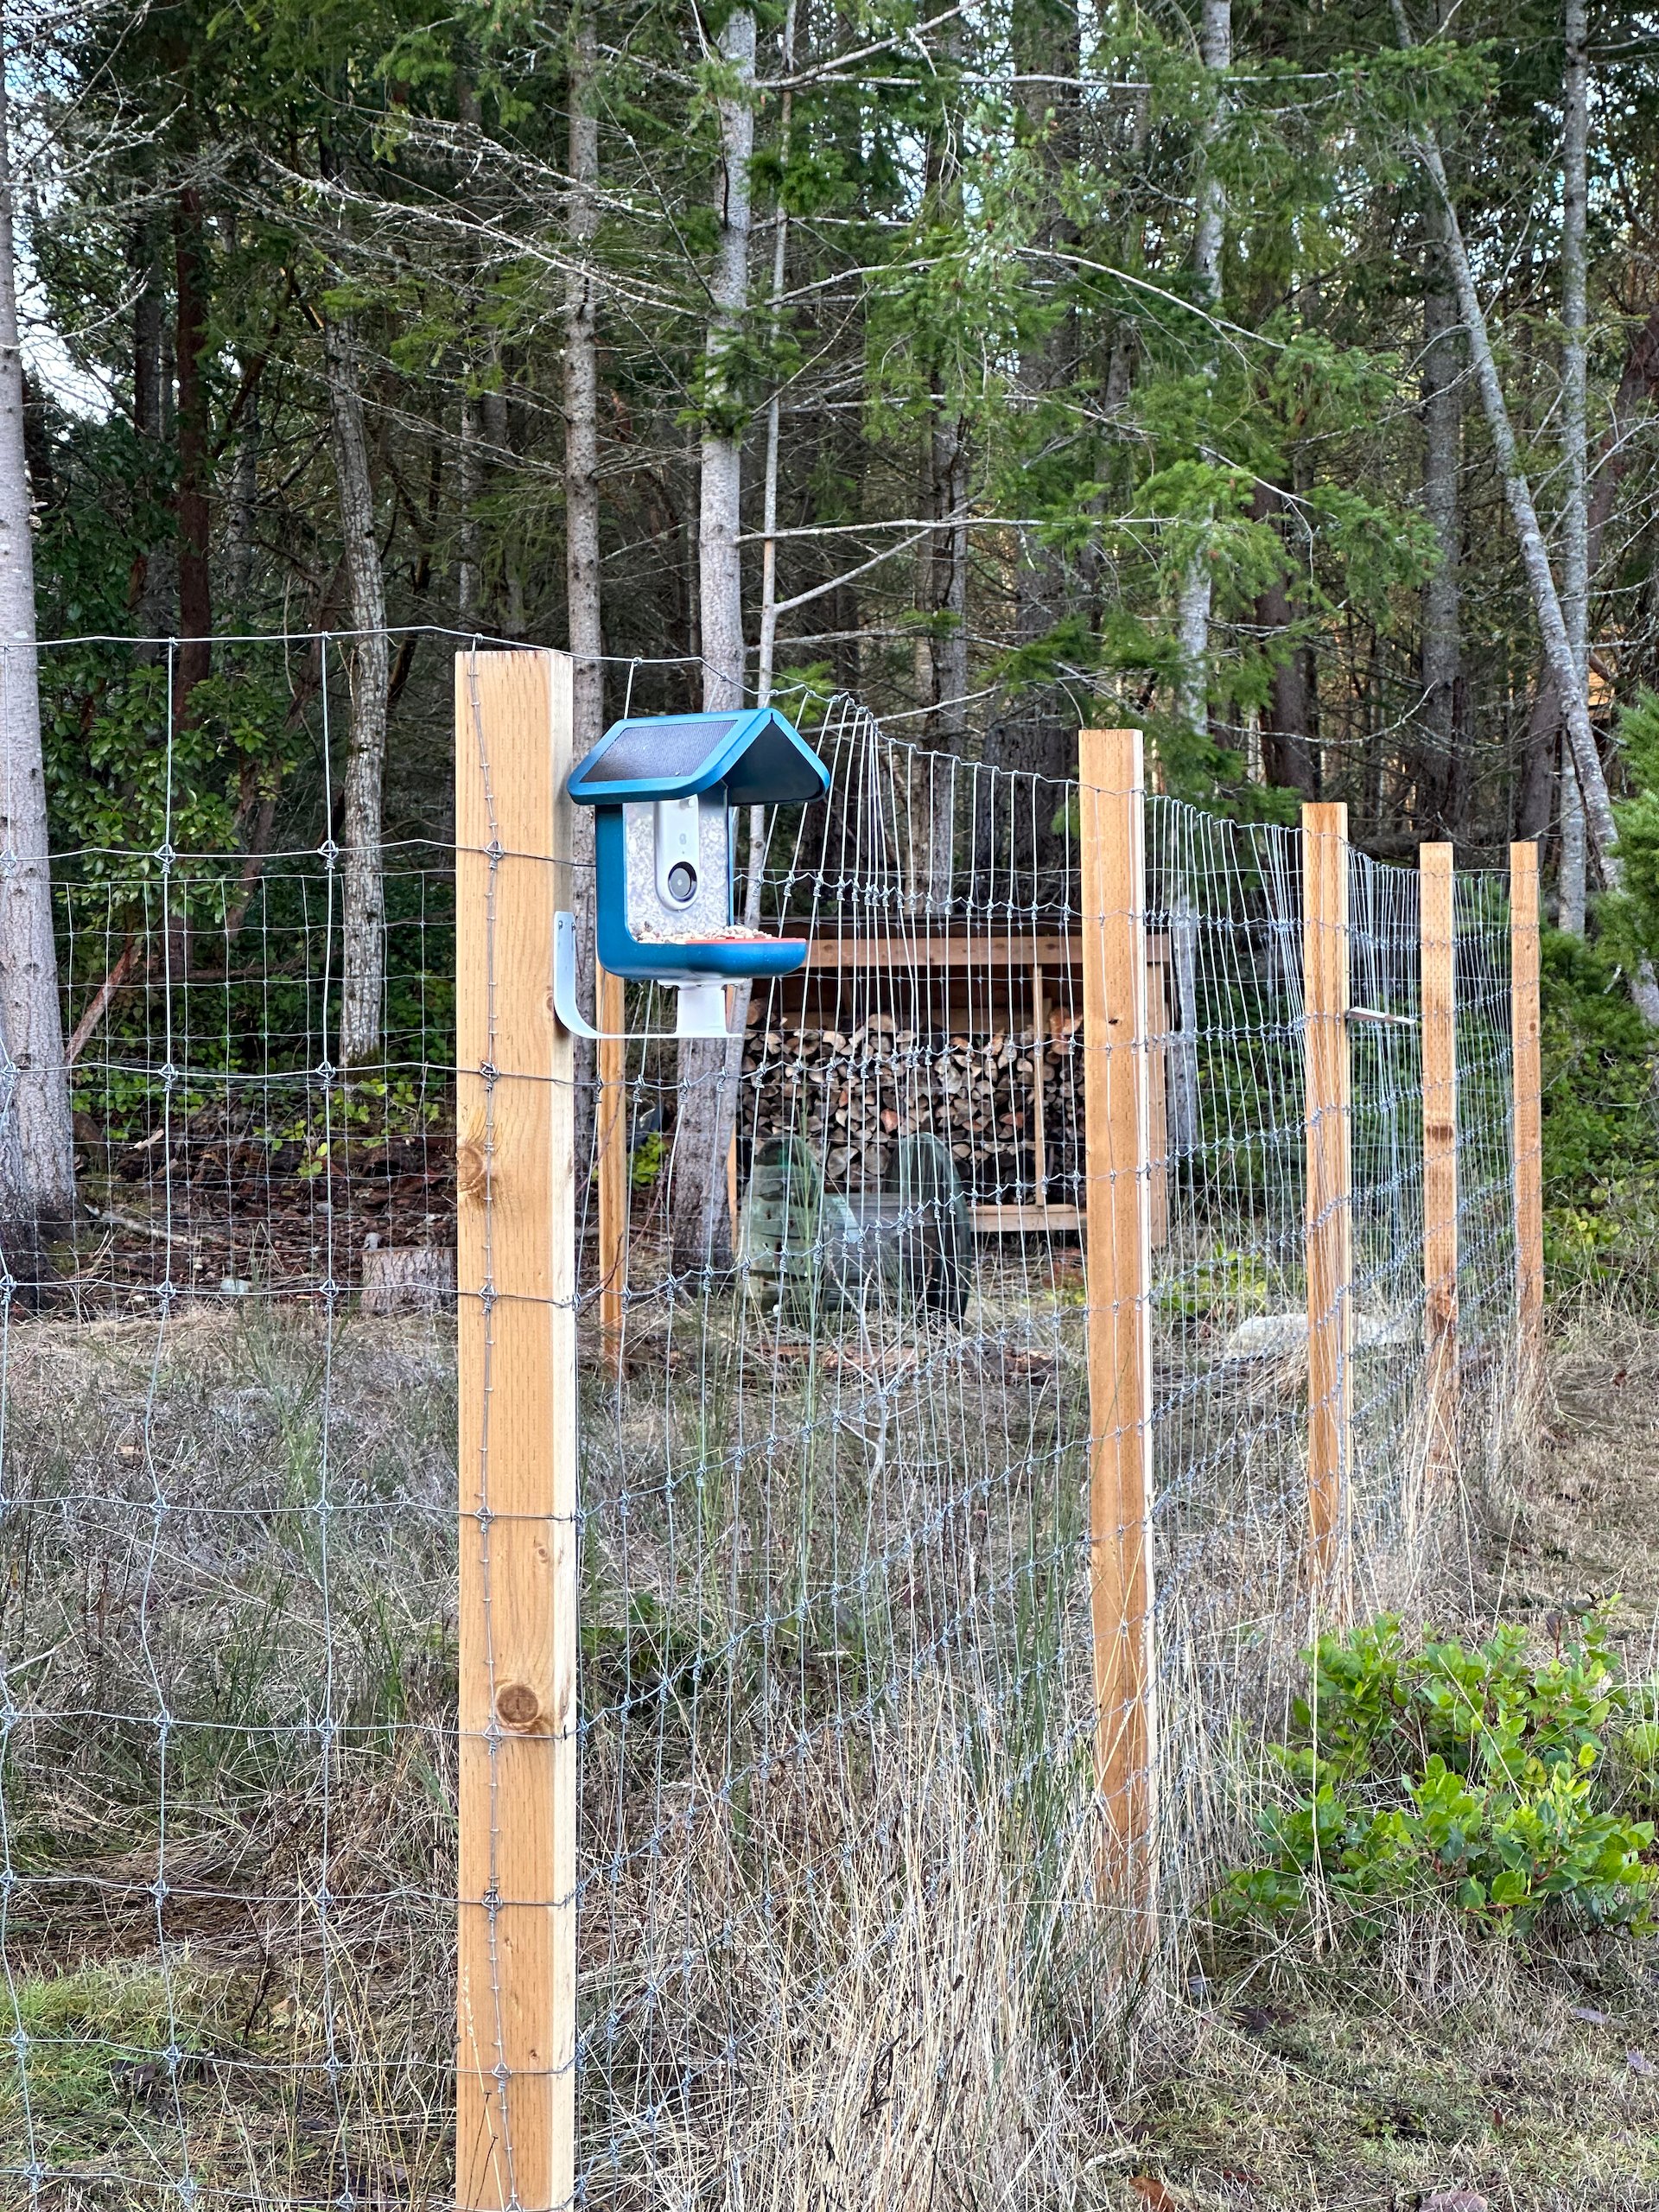  We also needed to move the Bird Buddy feeder to a different spot. It was in the forest, but it wasn’t getting enough light to charge. So we moved it over to the edge of the orchard. It will take a little while for the birds to re-discover it. 